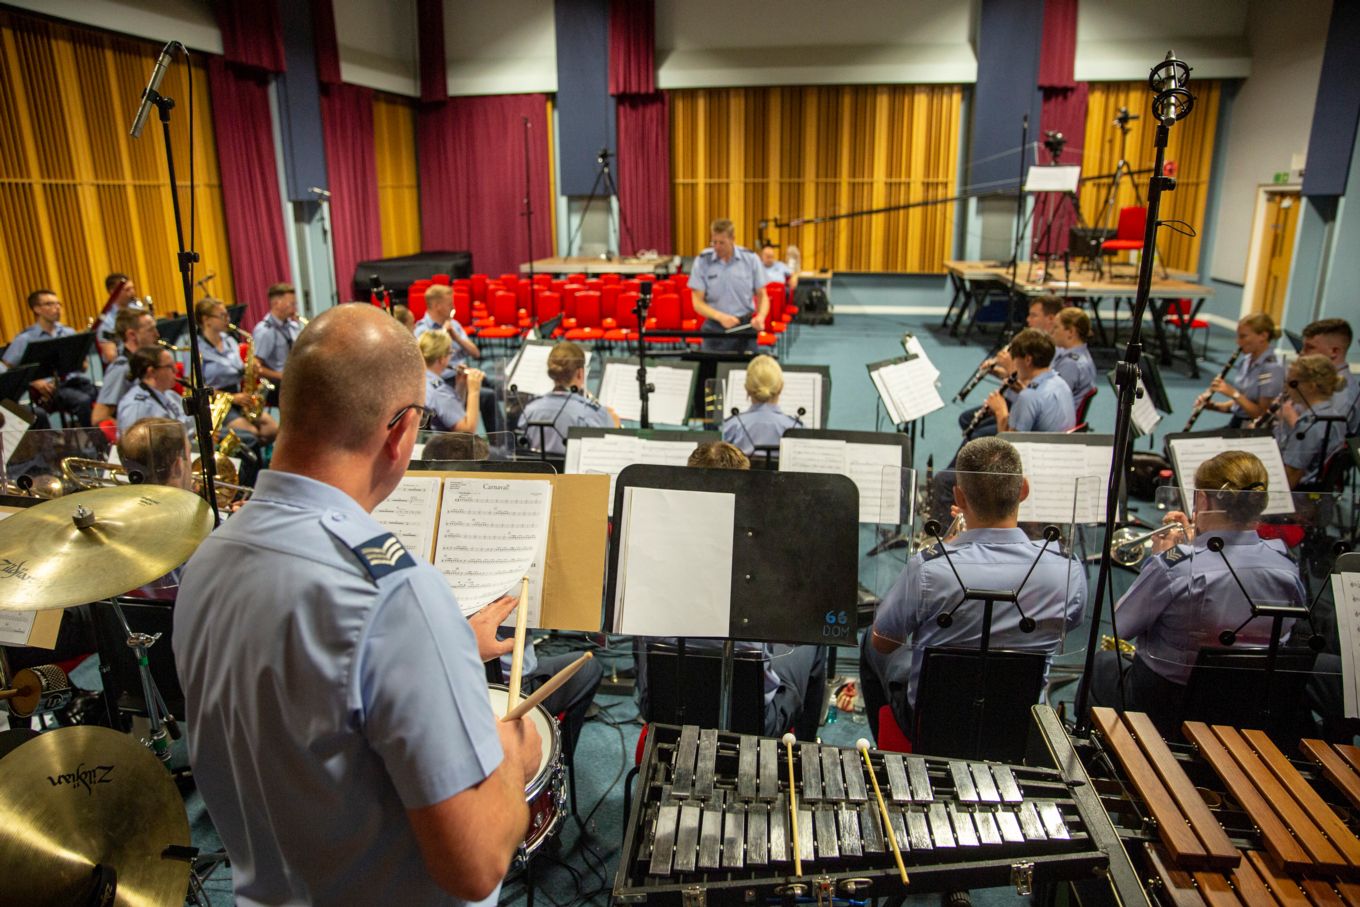 Band of the RAF Regiment rehearse in their bandroom.